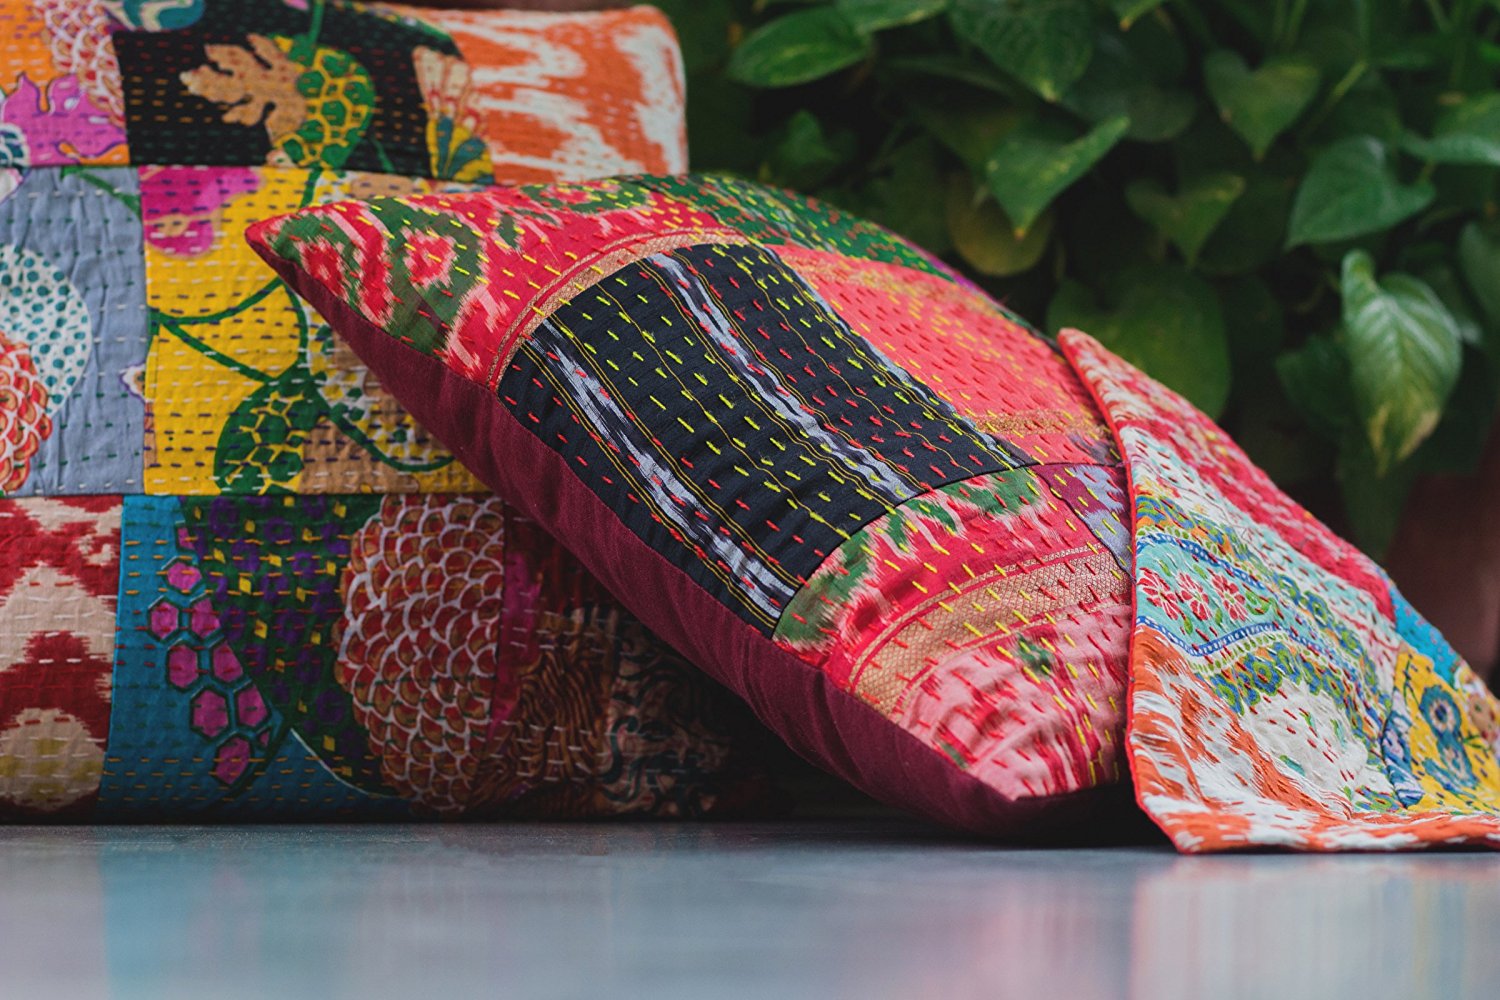 Details about   Wholesale Indian Handmade Cotton Kantha-Work Cushion Cover Pillow Case Throw 